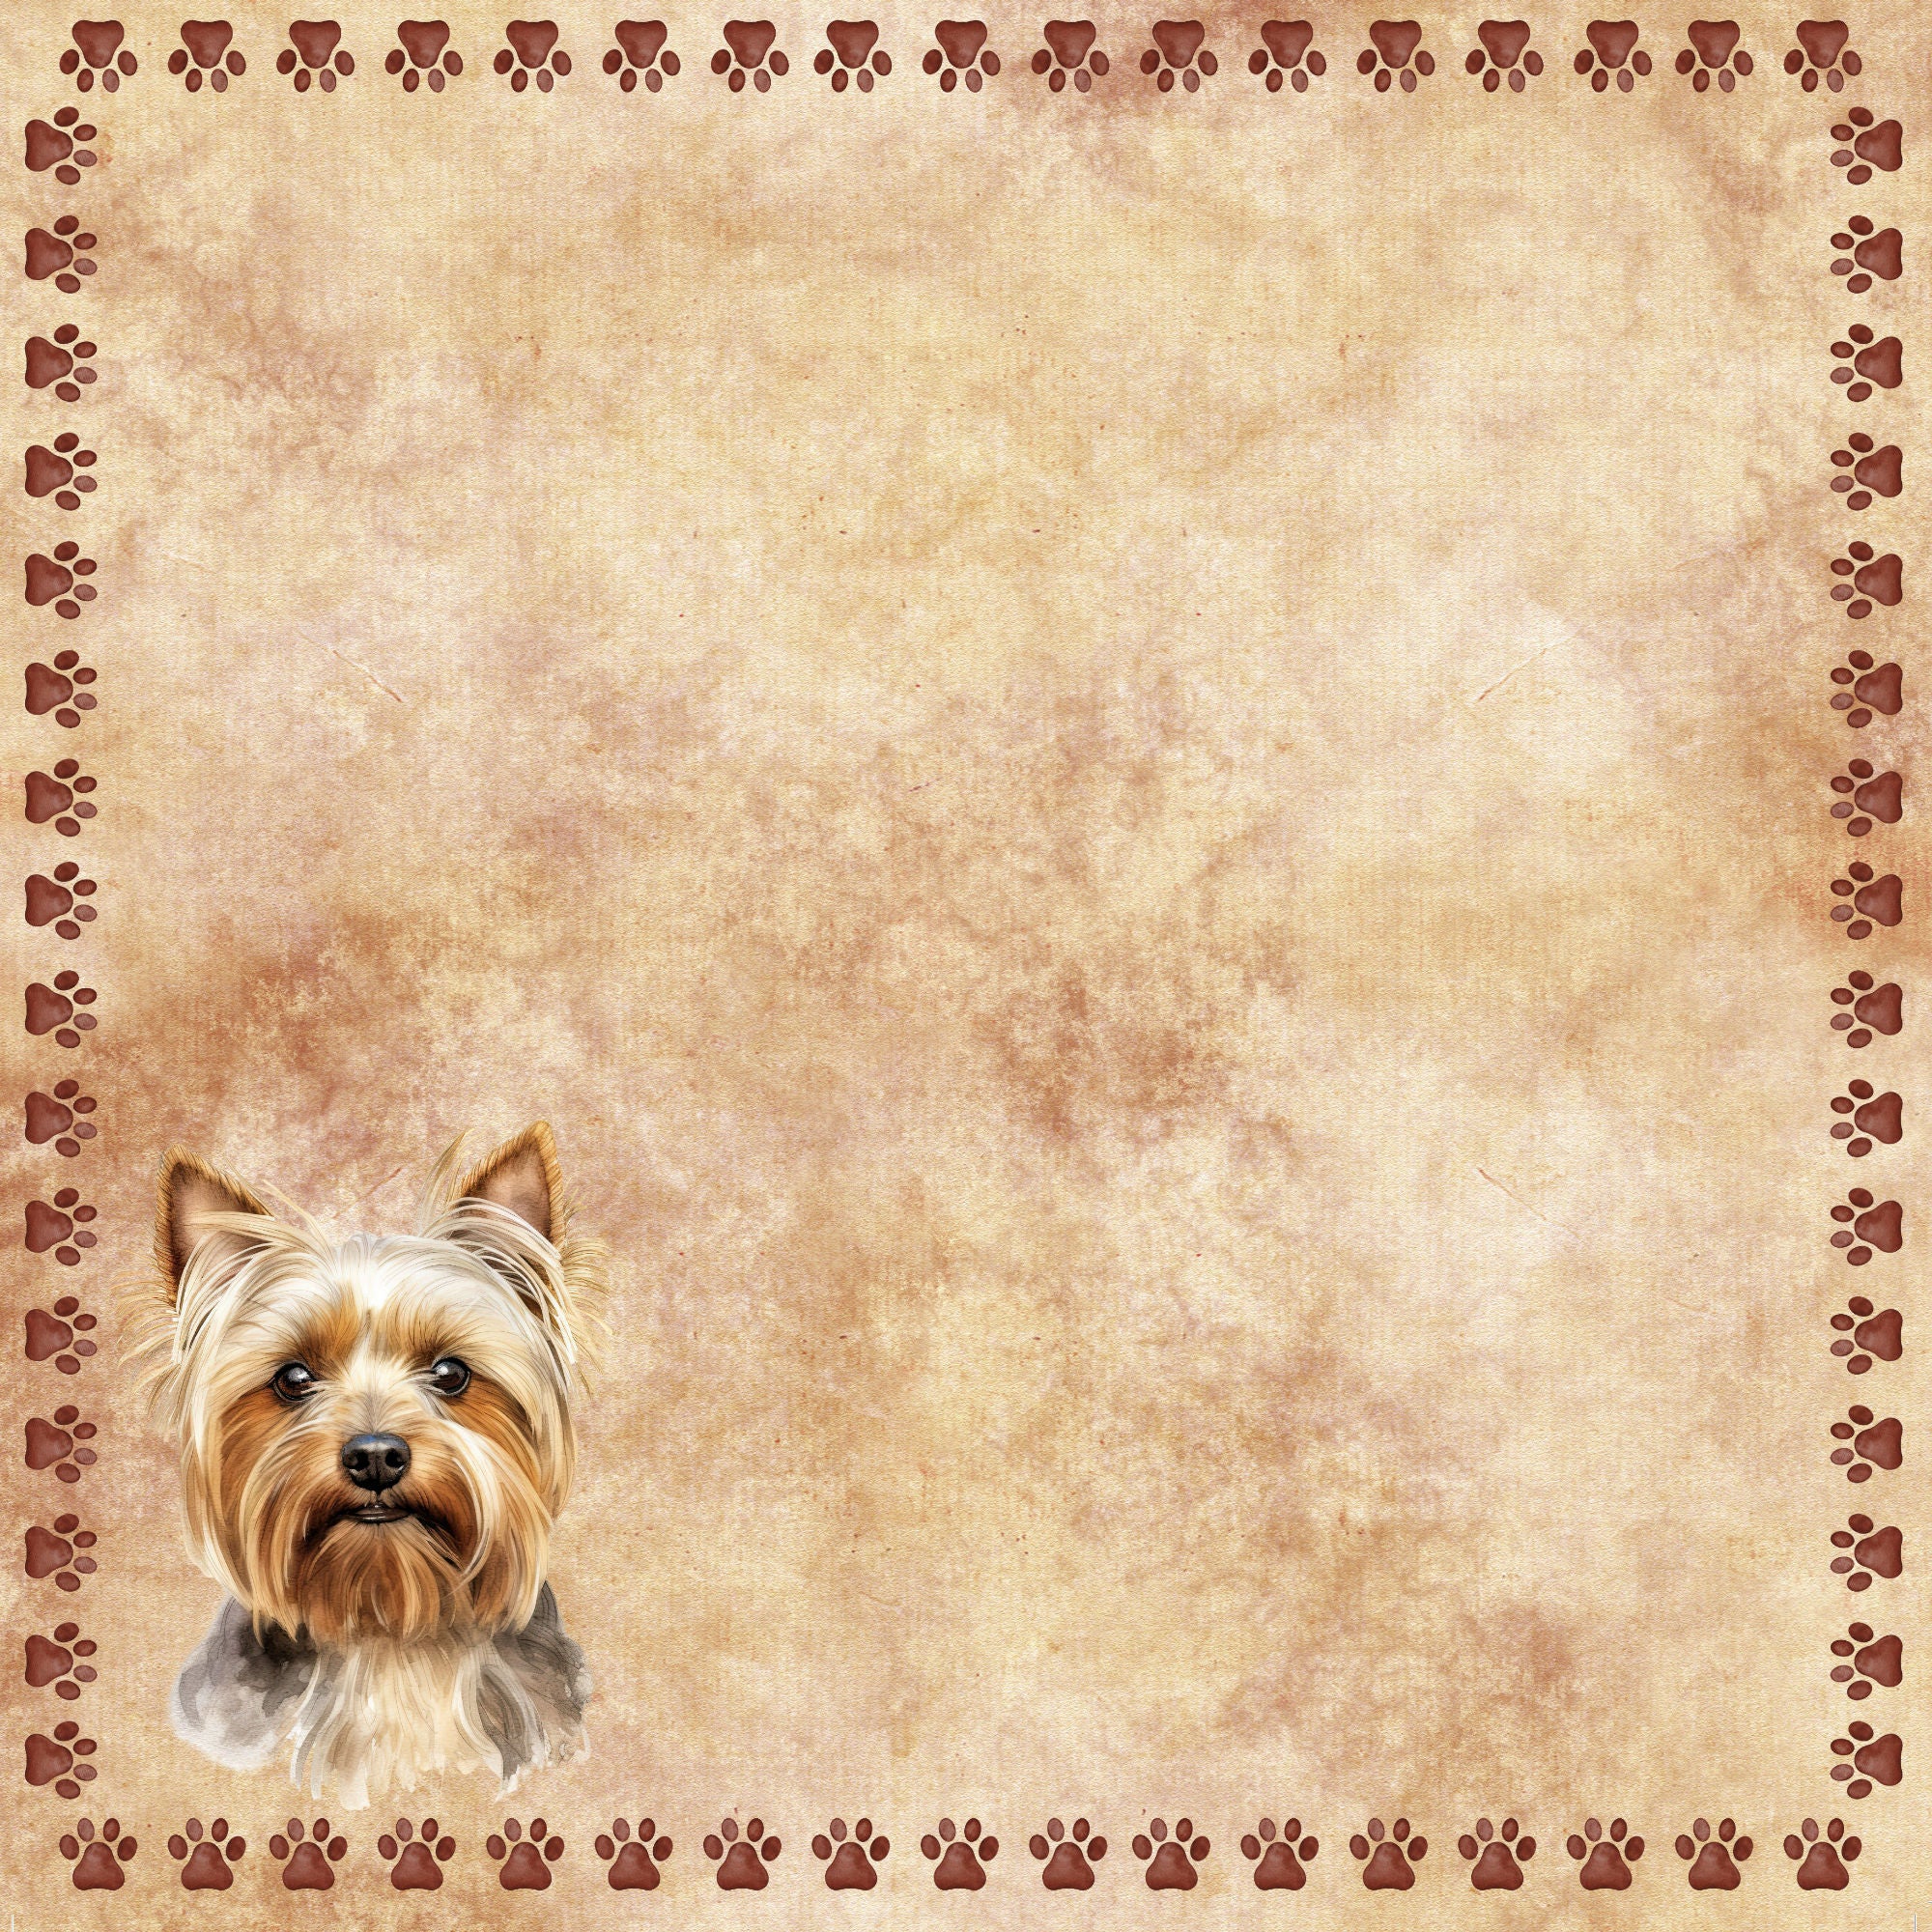 Dog Breeds Collection Yorkshire Terrier 12 x 12 Double-Sided Scrapbook Paper by SSC Designs